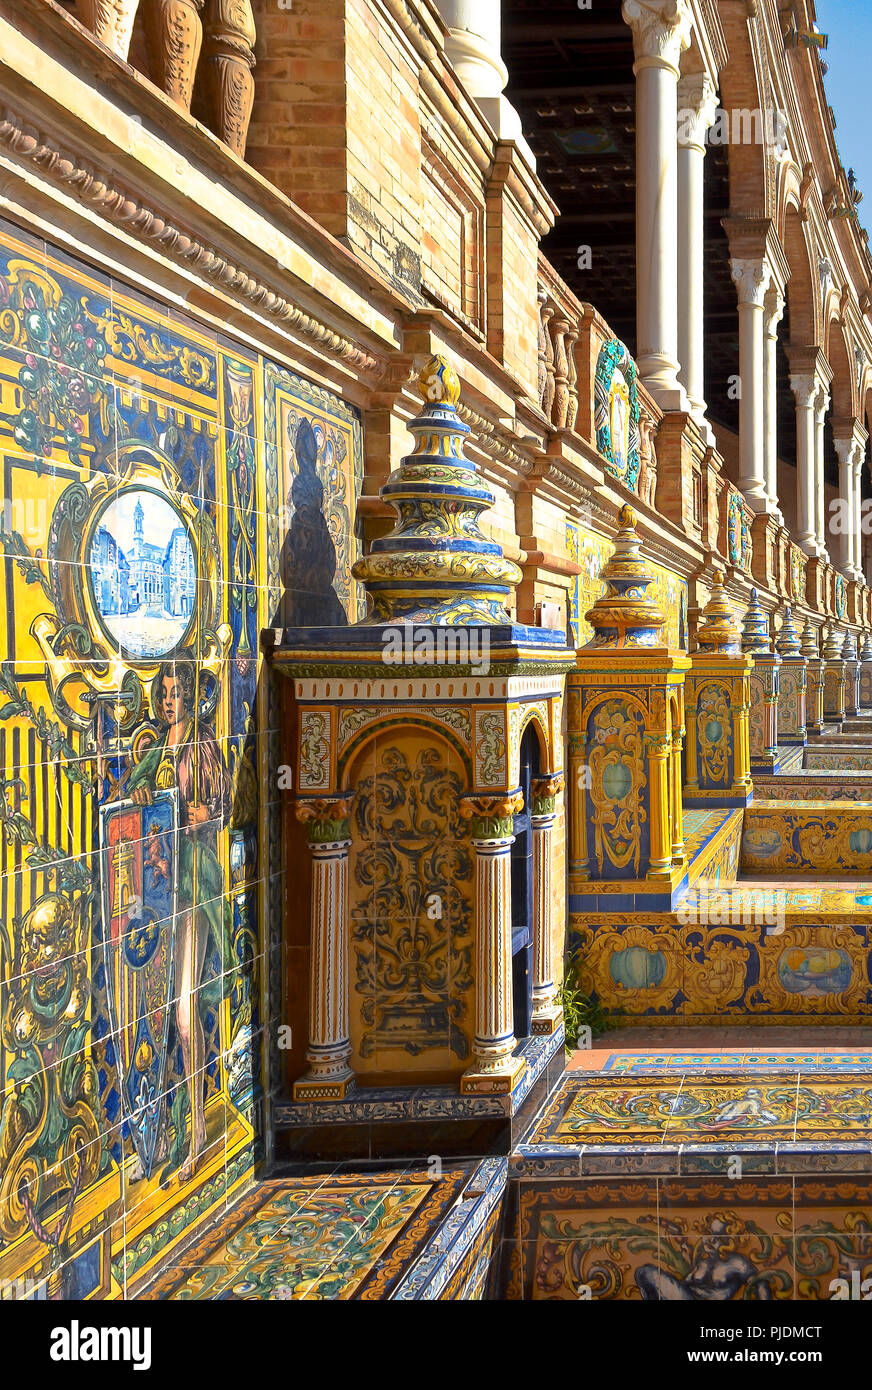 Regional Benches and Tile Work at Plaza de Espana, Seville, Spain Stock Photo